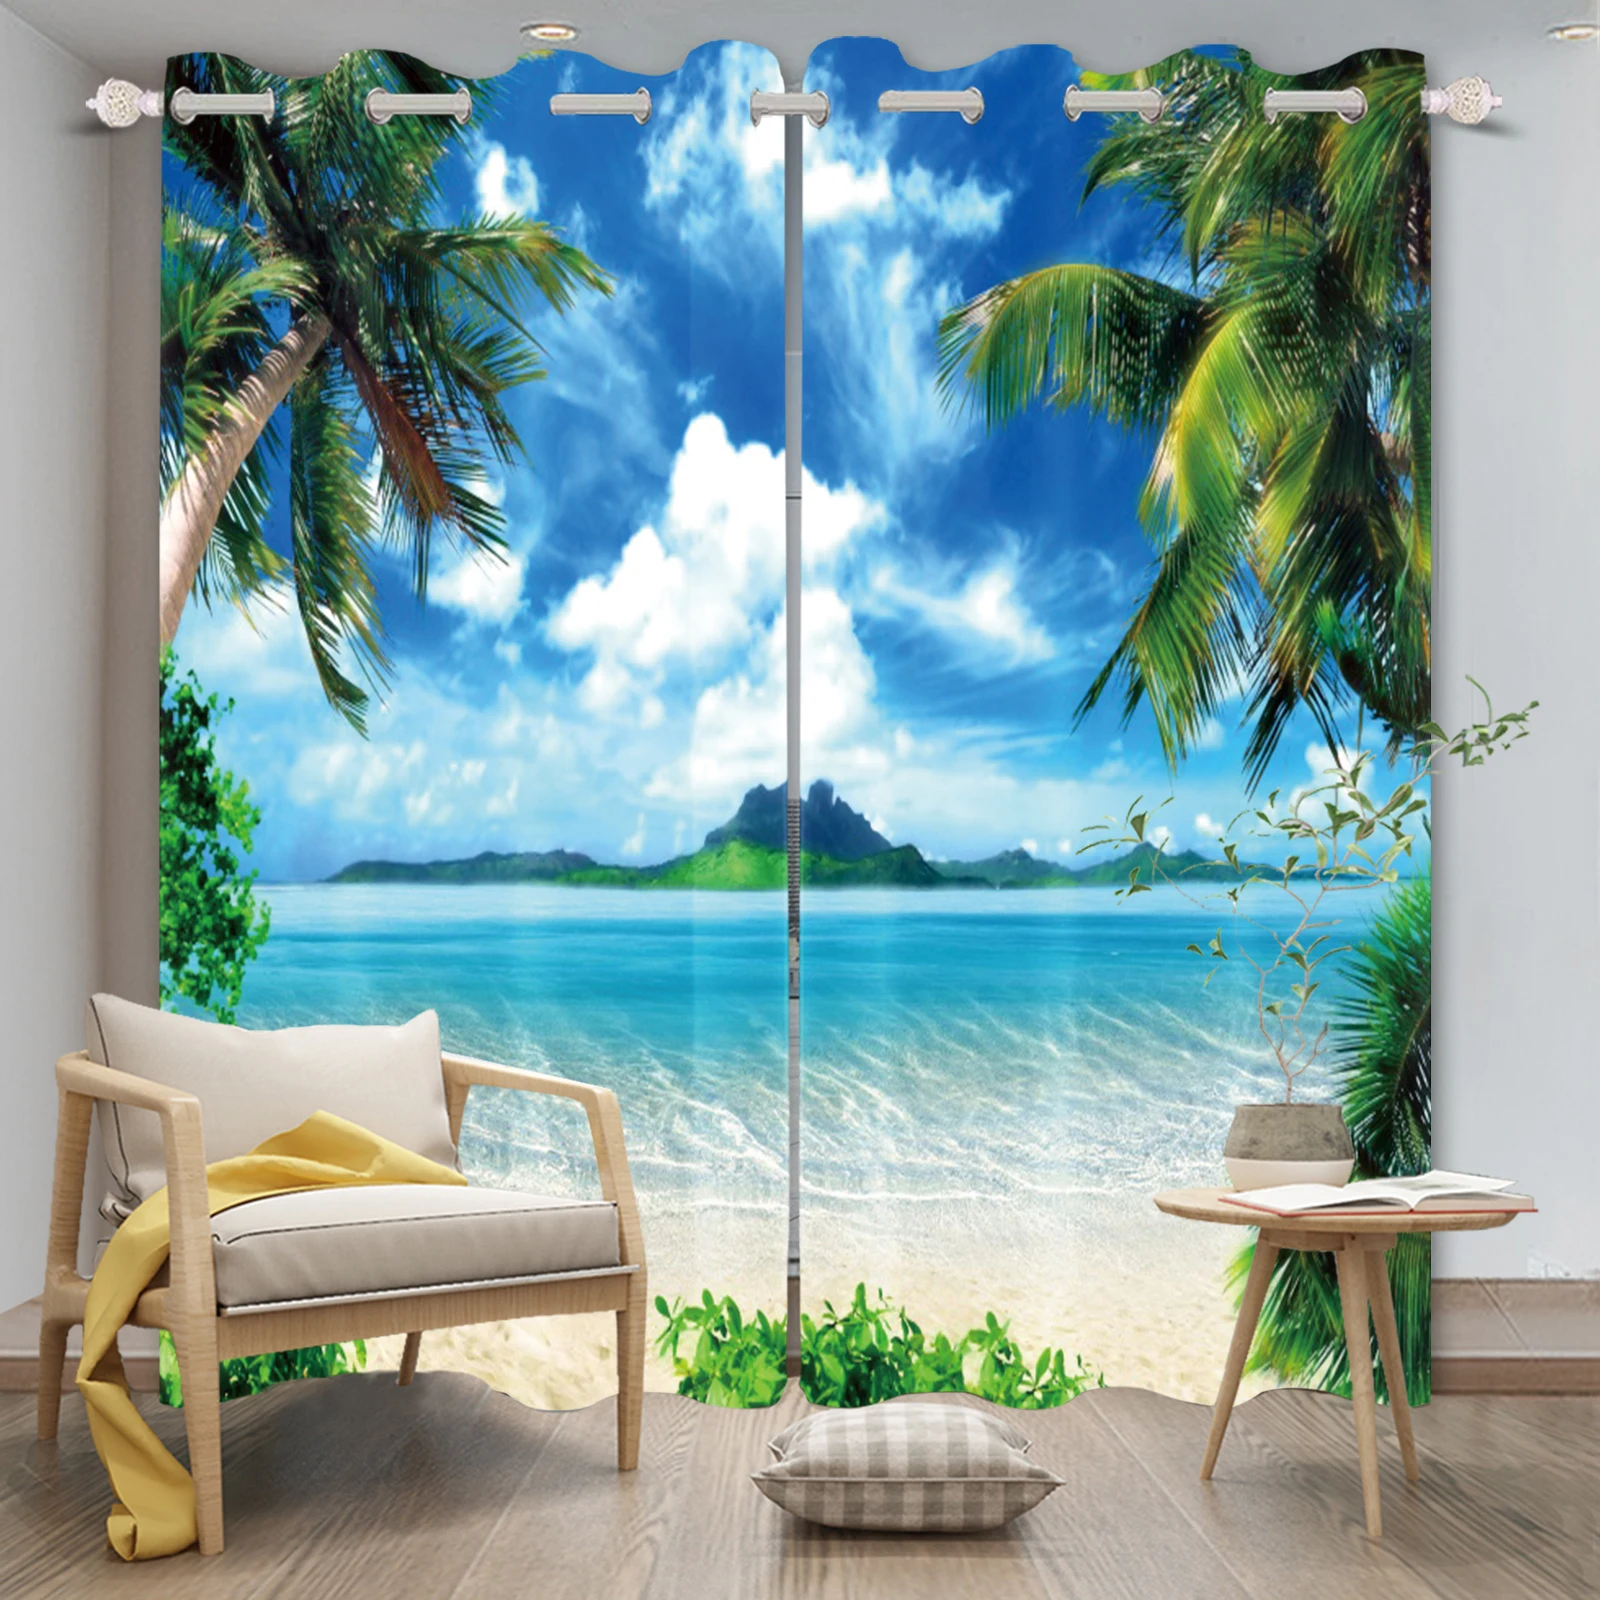 

Seaside Beach Scenery 3D Printing Curtains Coconut Tree Printed Cortinas For Living Room Bedroom Sunshade Insulation Drapes